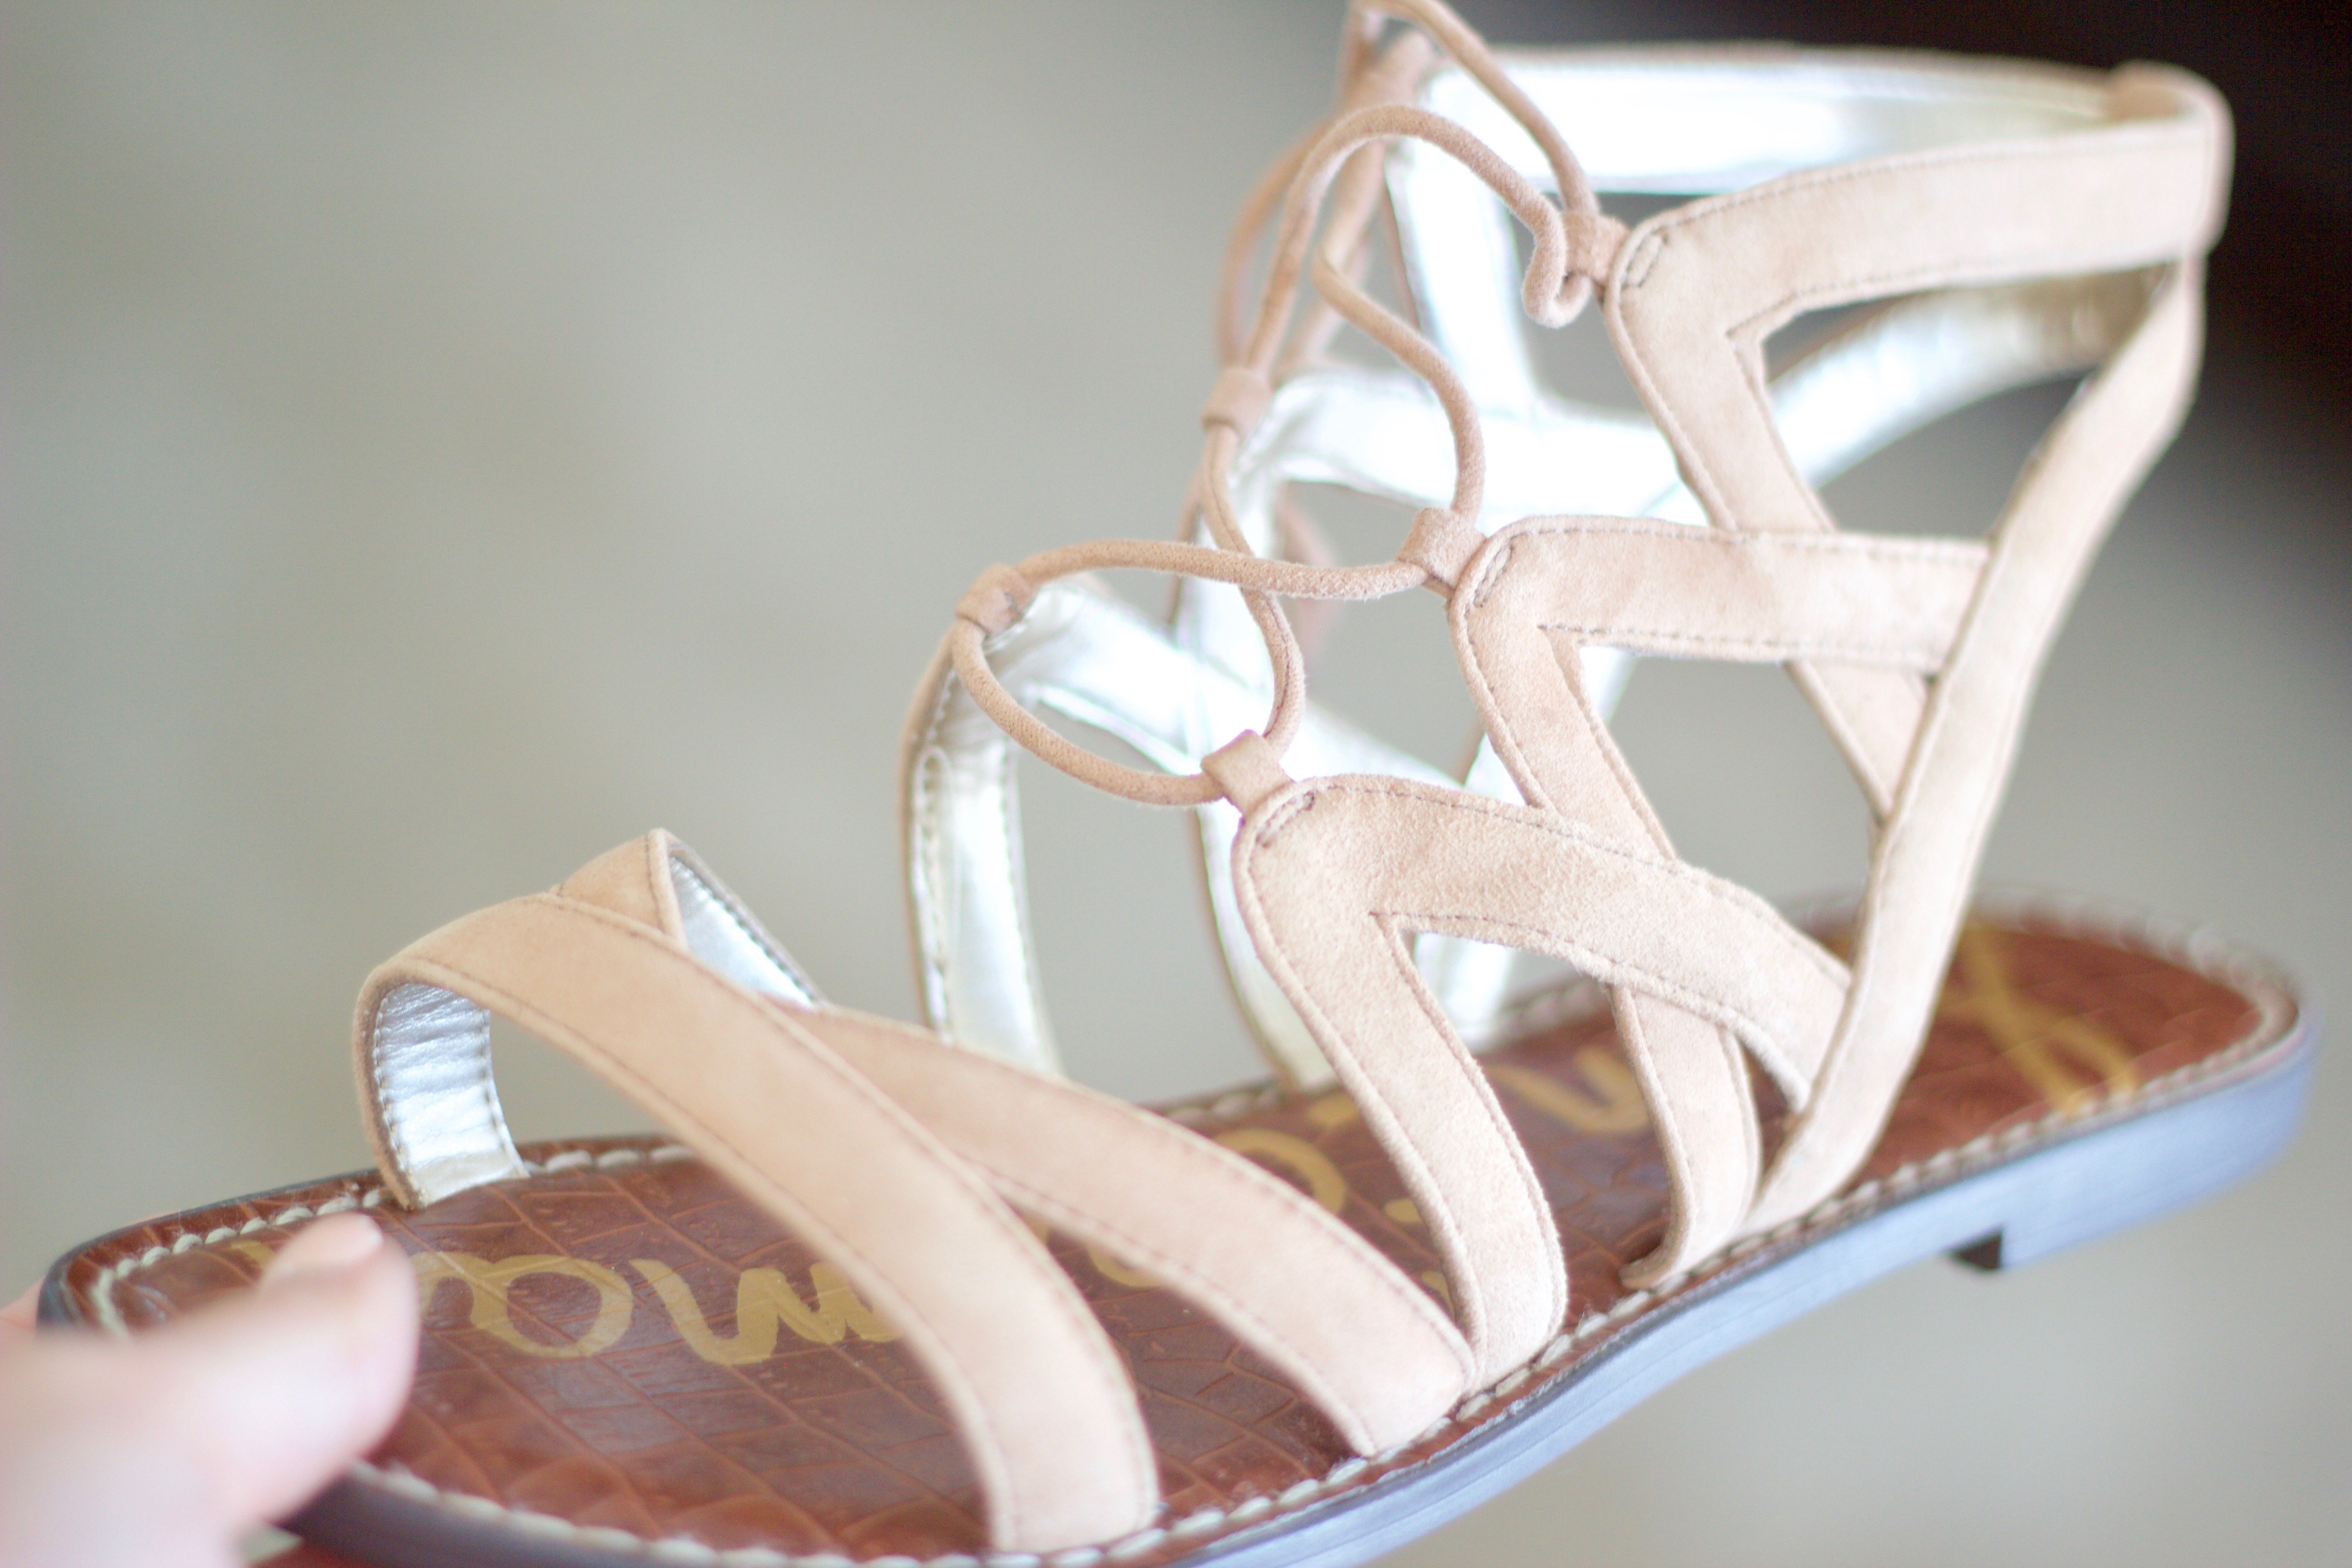 Sam edelman gemma sandals, see what else was in my May trunk from Trunk Club! 